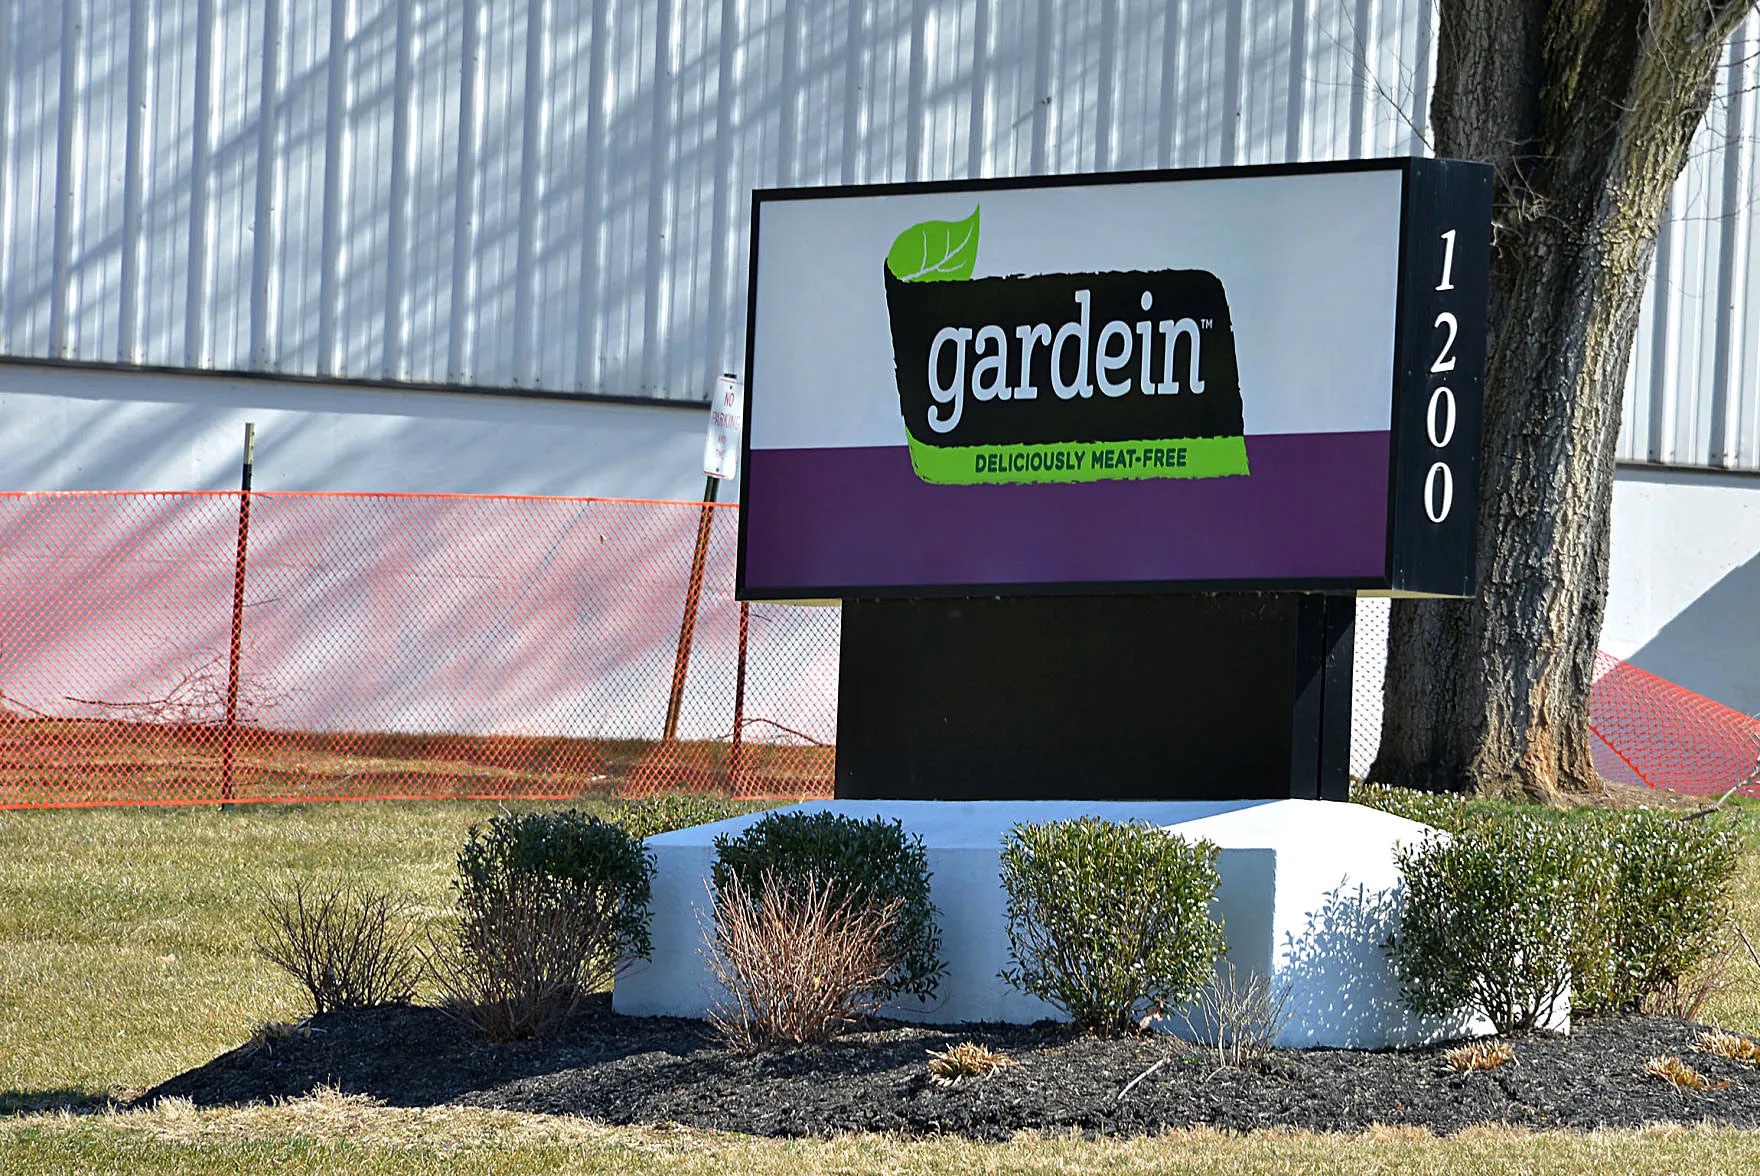 Gardein Foods Plant Expansion Phase-2